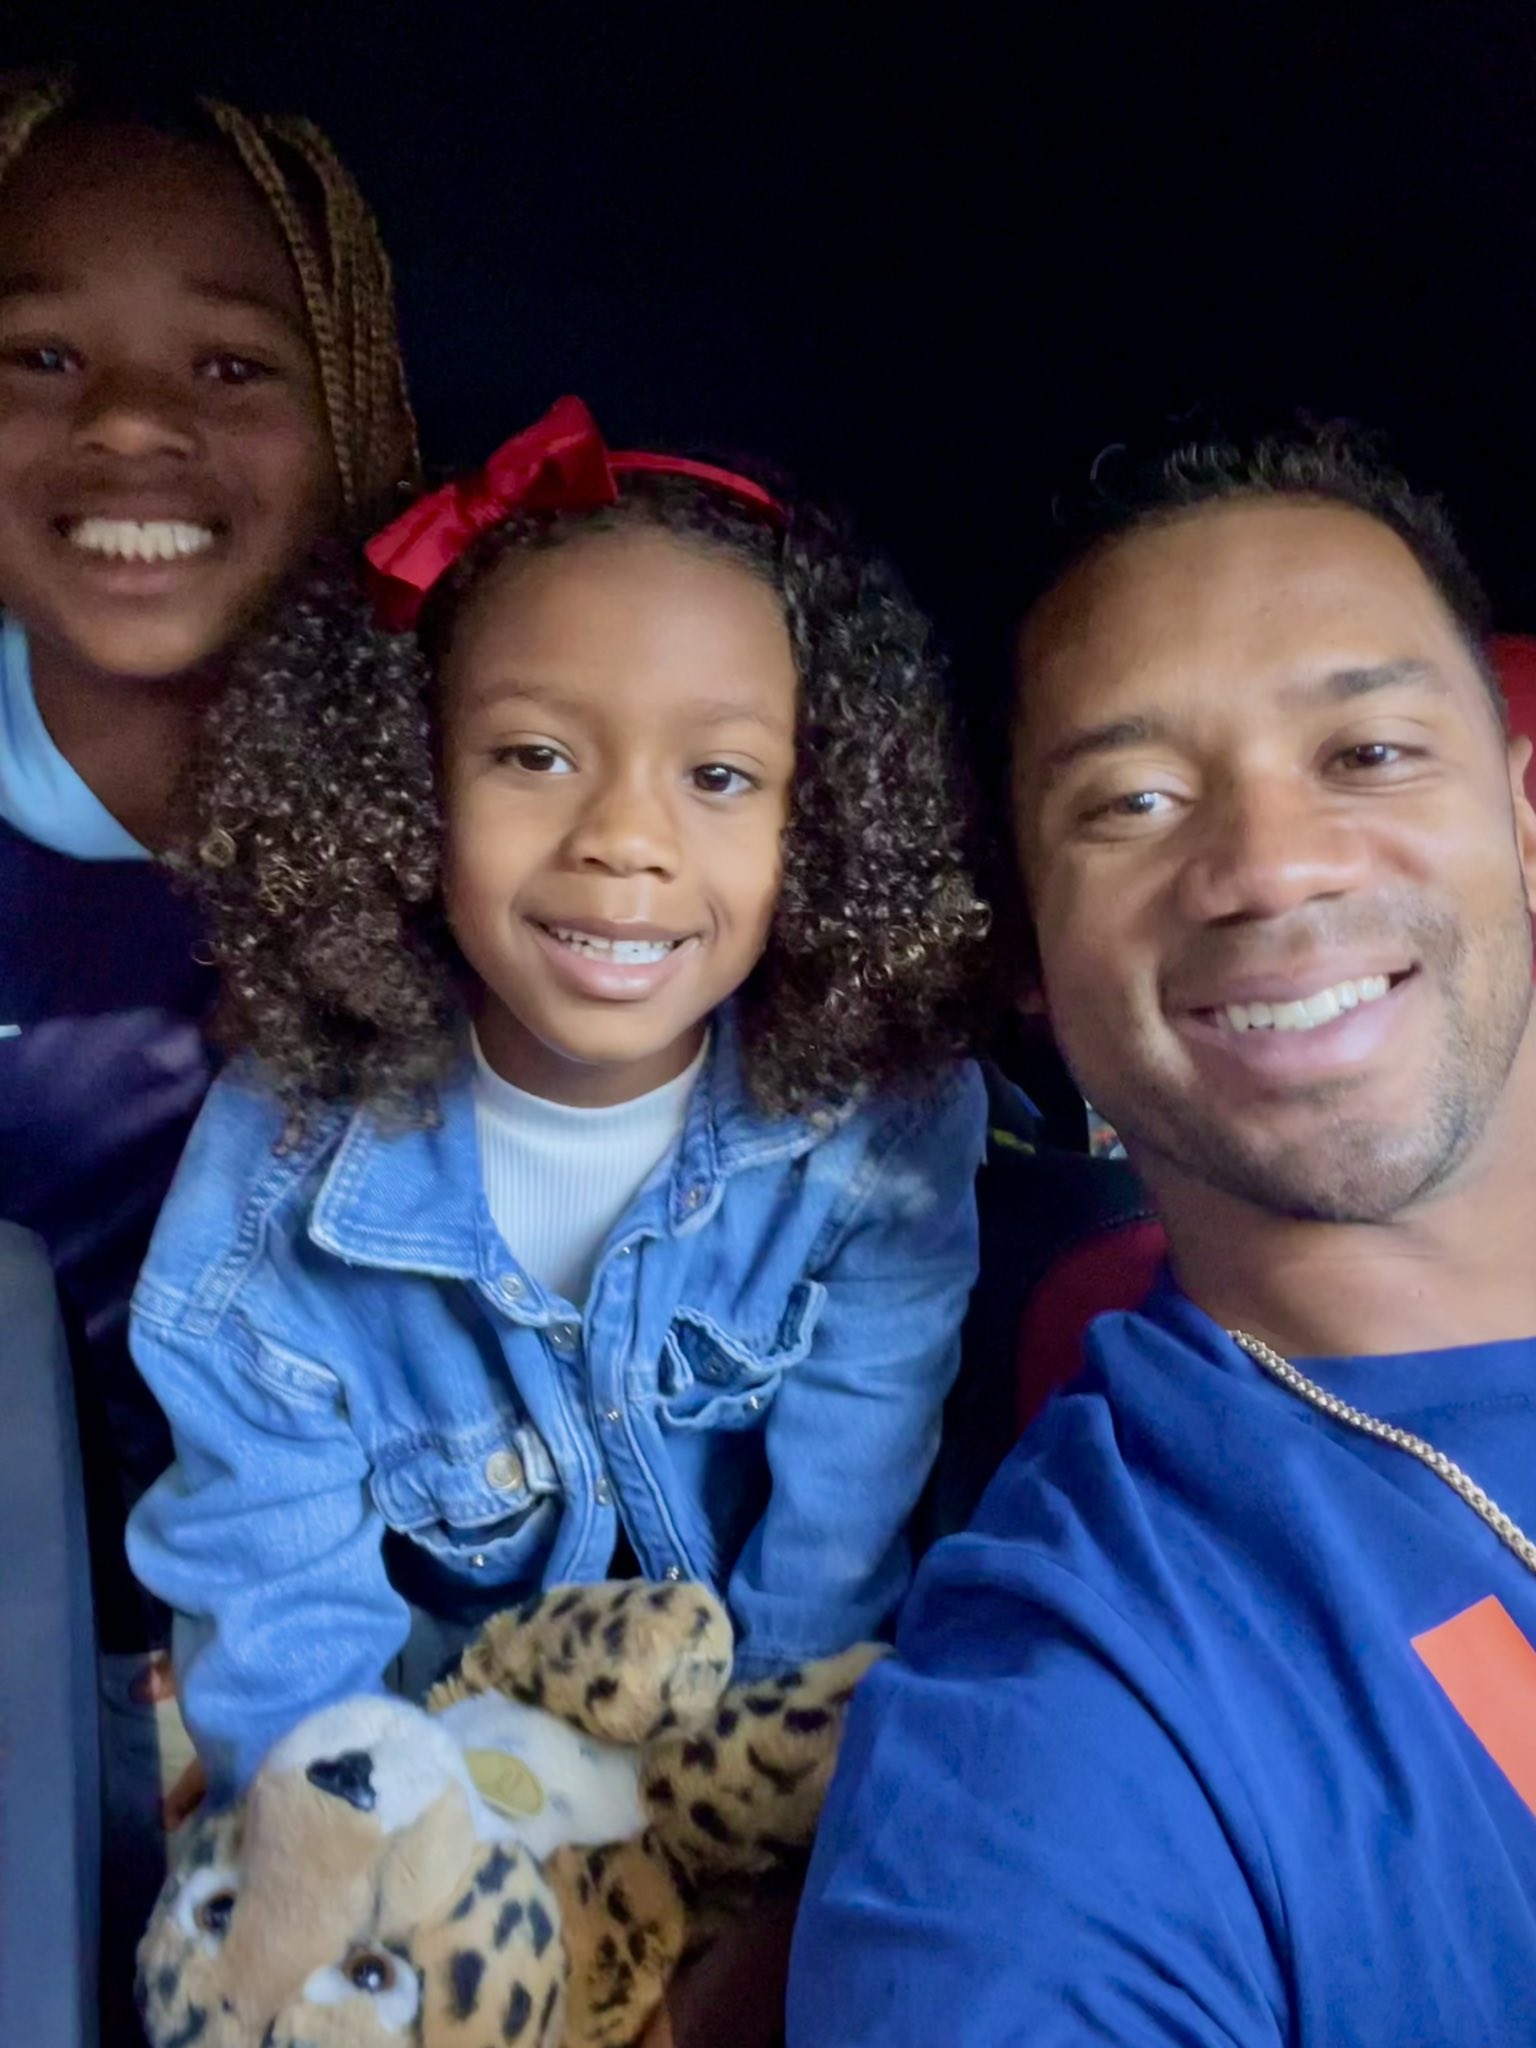 Russell Wilson on X: Nothing better than seeing the smiles on